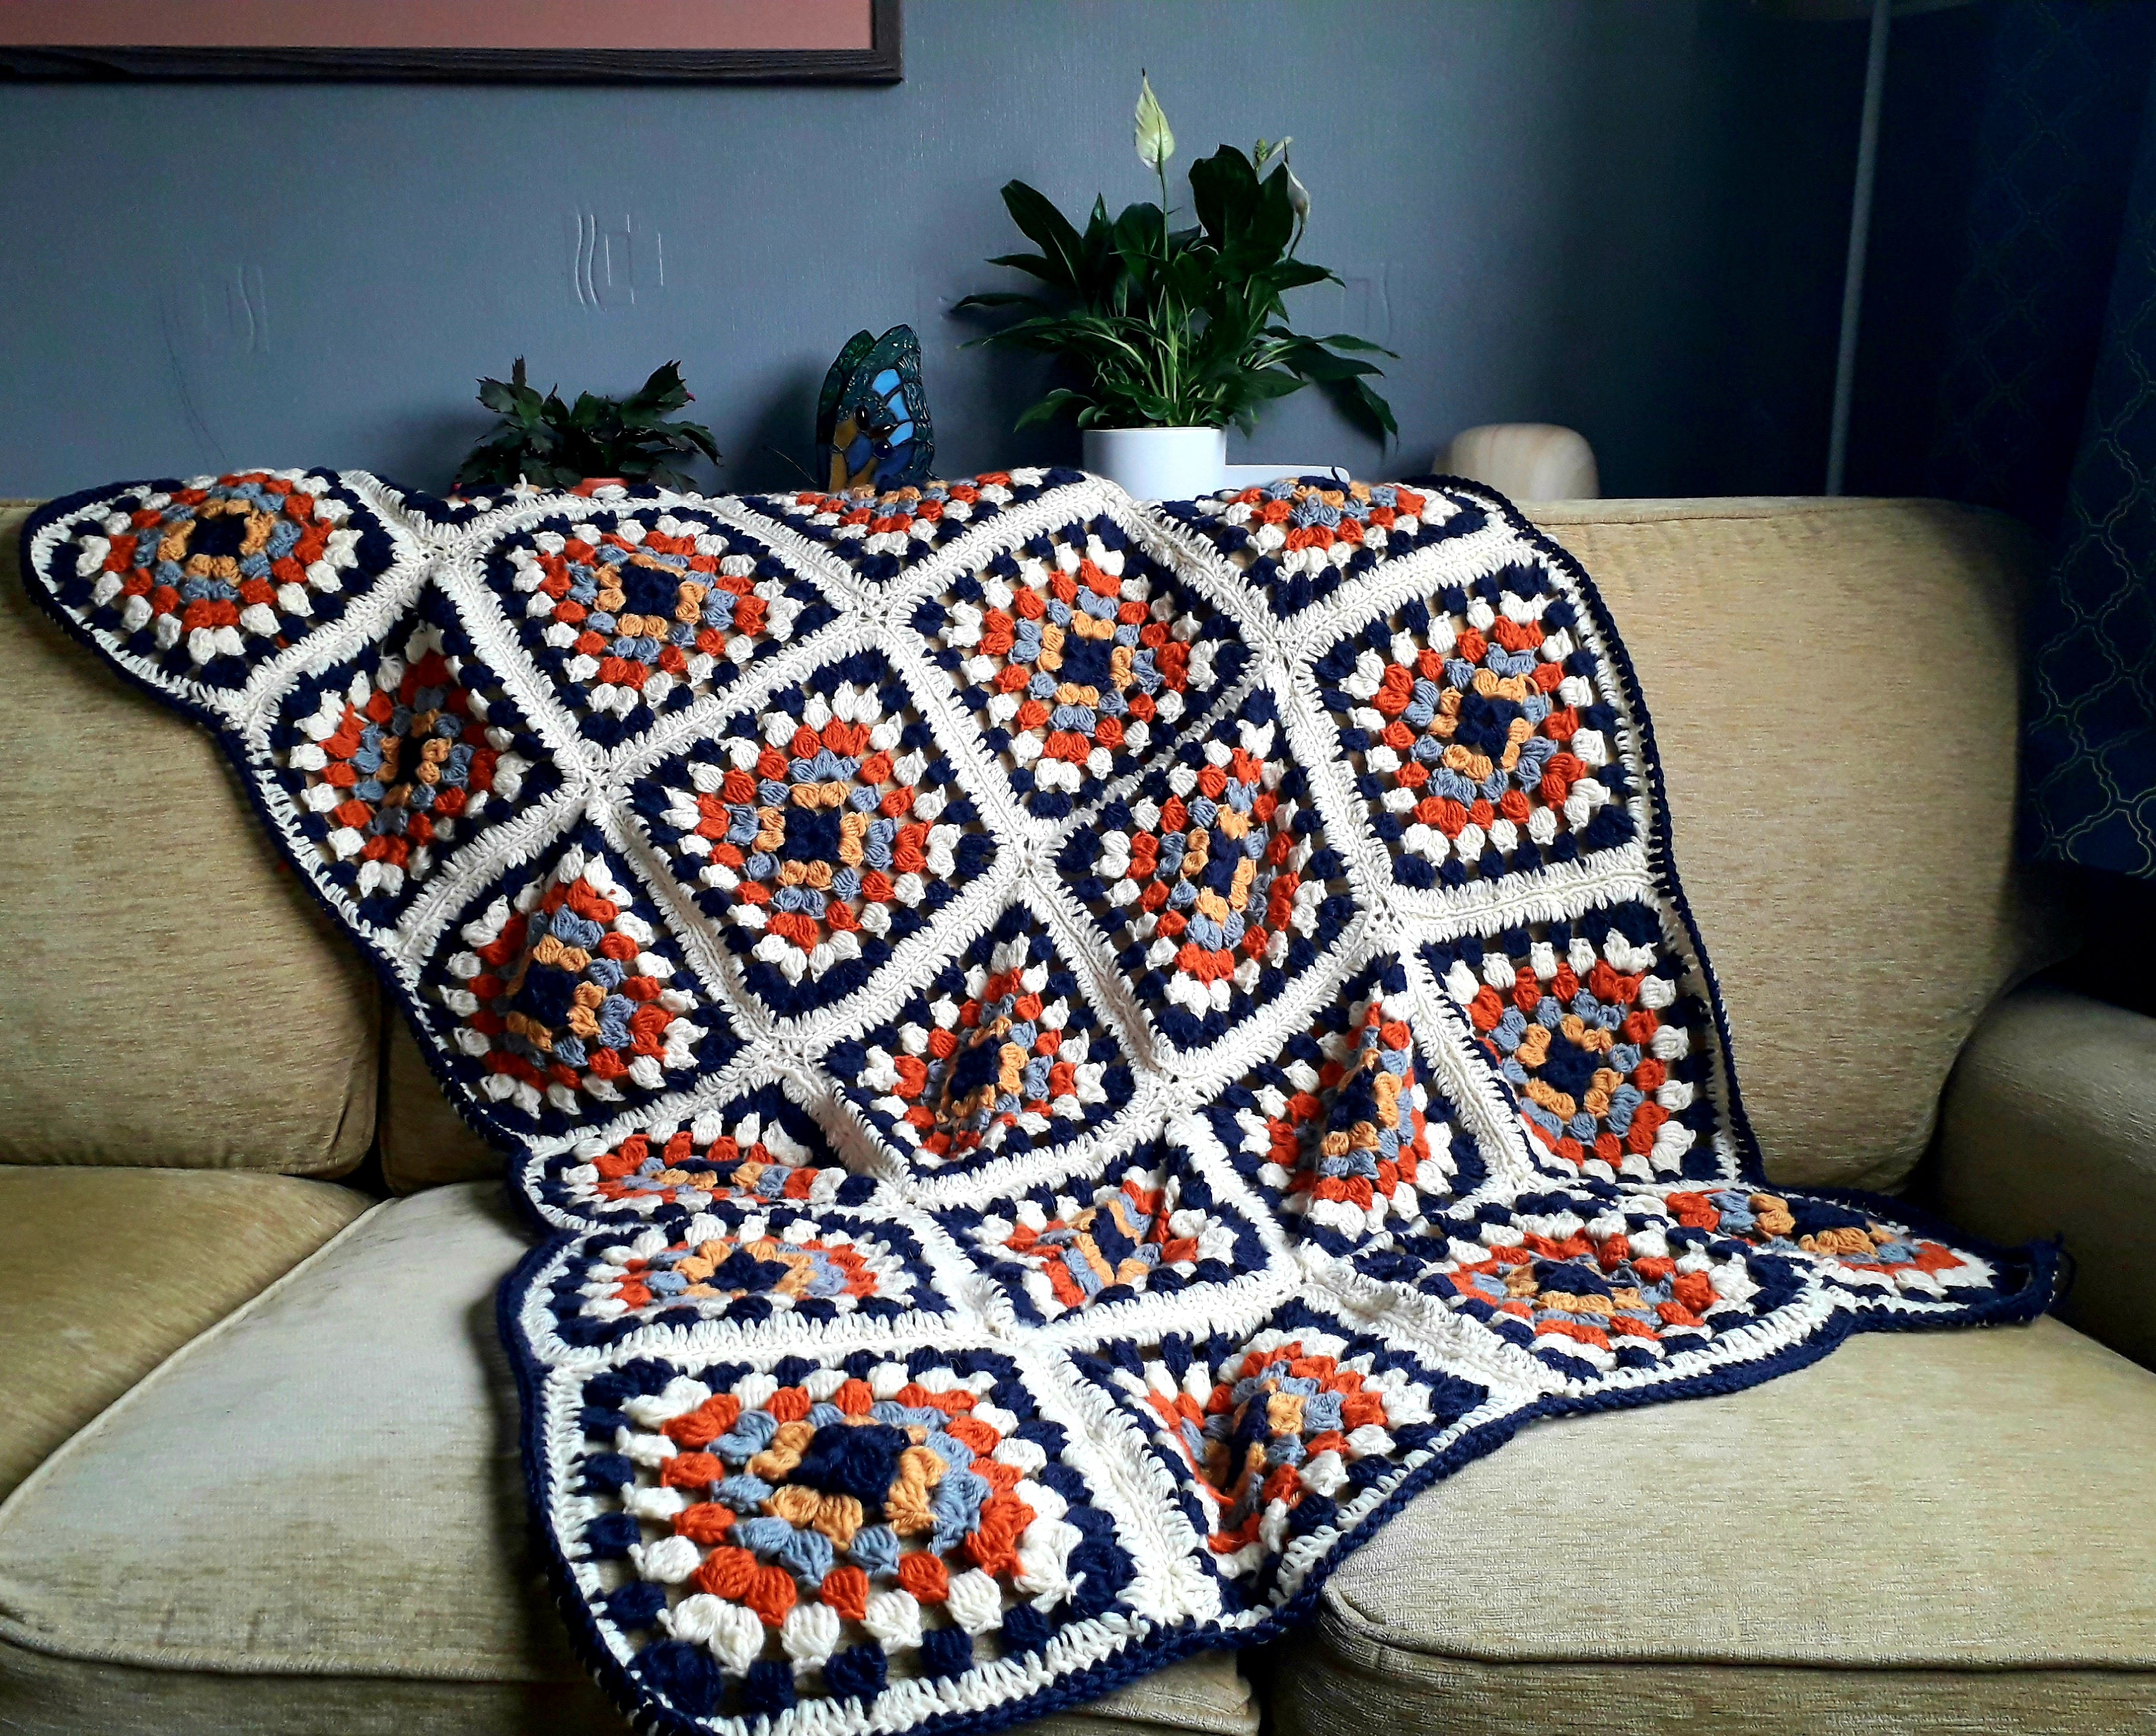 How to Crochet a Granny Square Baby Blanket - Crafting for Weeks